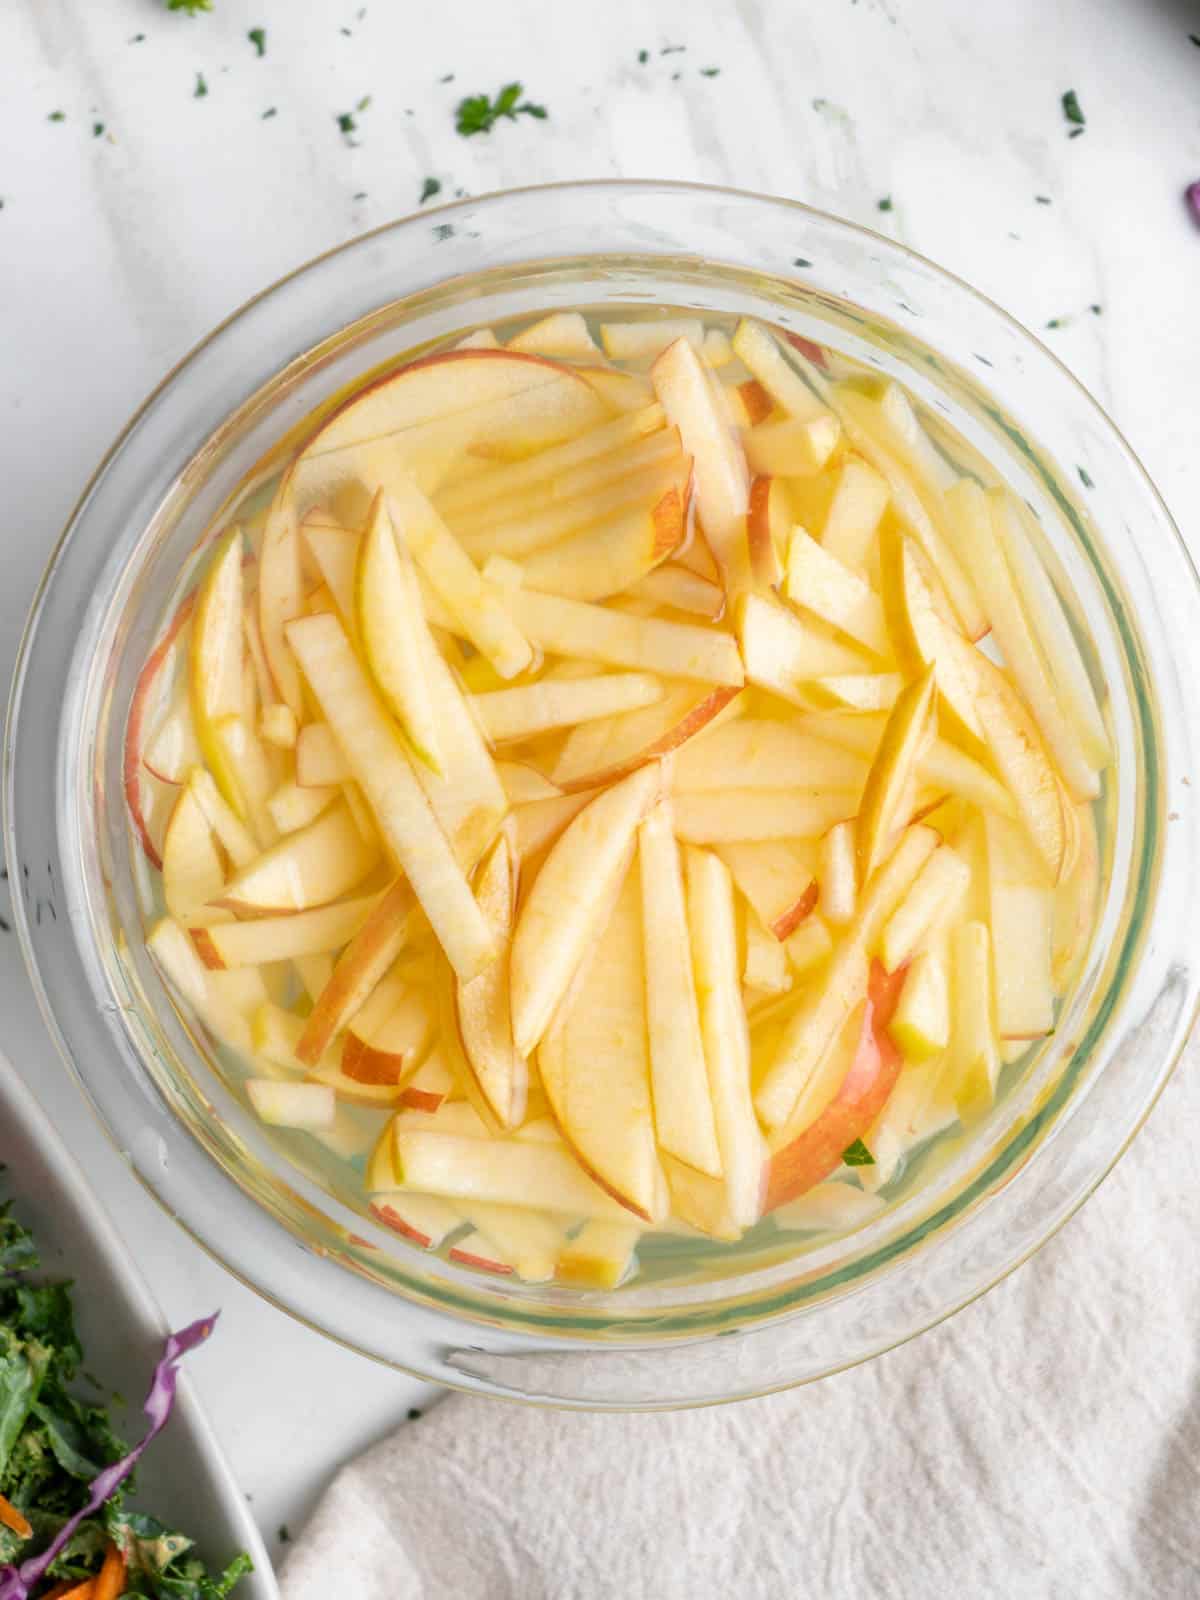 Soaking apples in cold water.